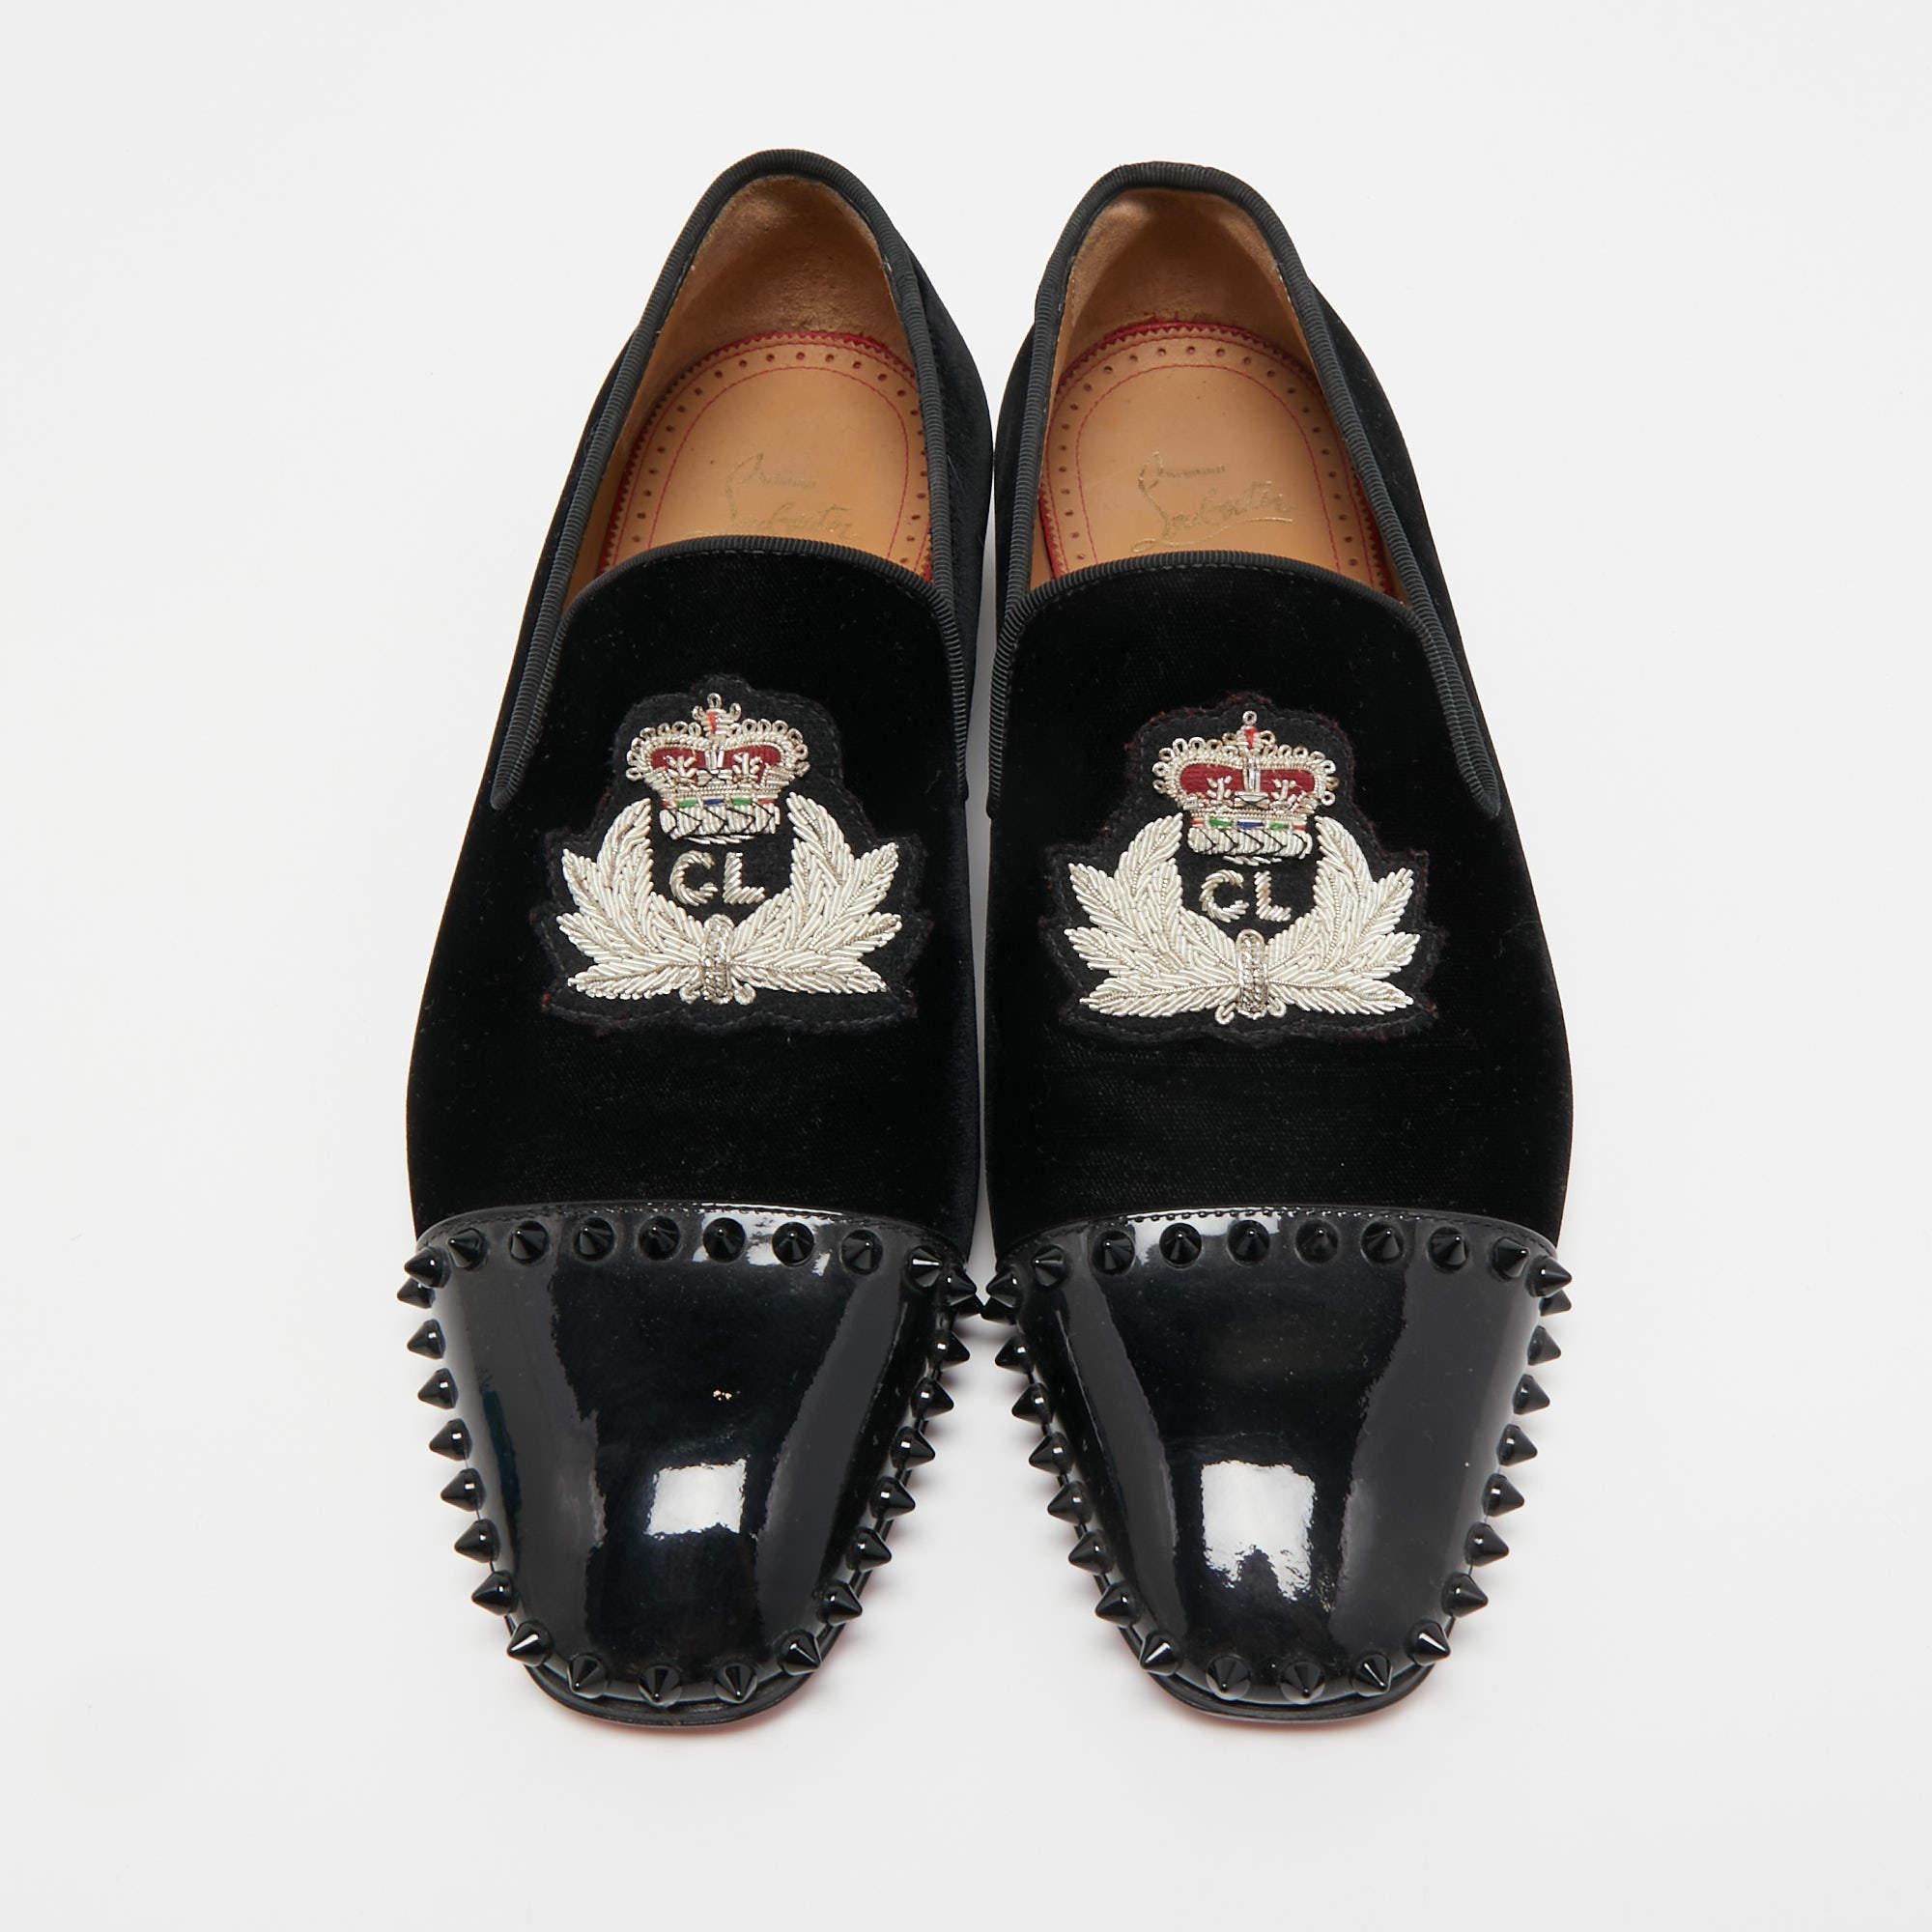 With these Christian Louboutin loafers, comfort and style are guaranteed. Crafted using velvet, they feature a black-navy blue hue and rest on durable soles.

Includes: The Luxury Closet Packaging, Extra Embellishment

